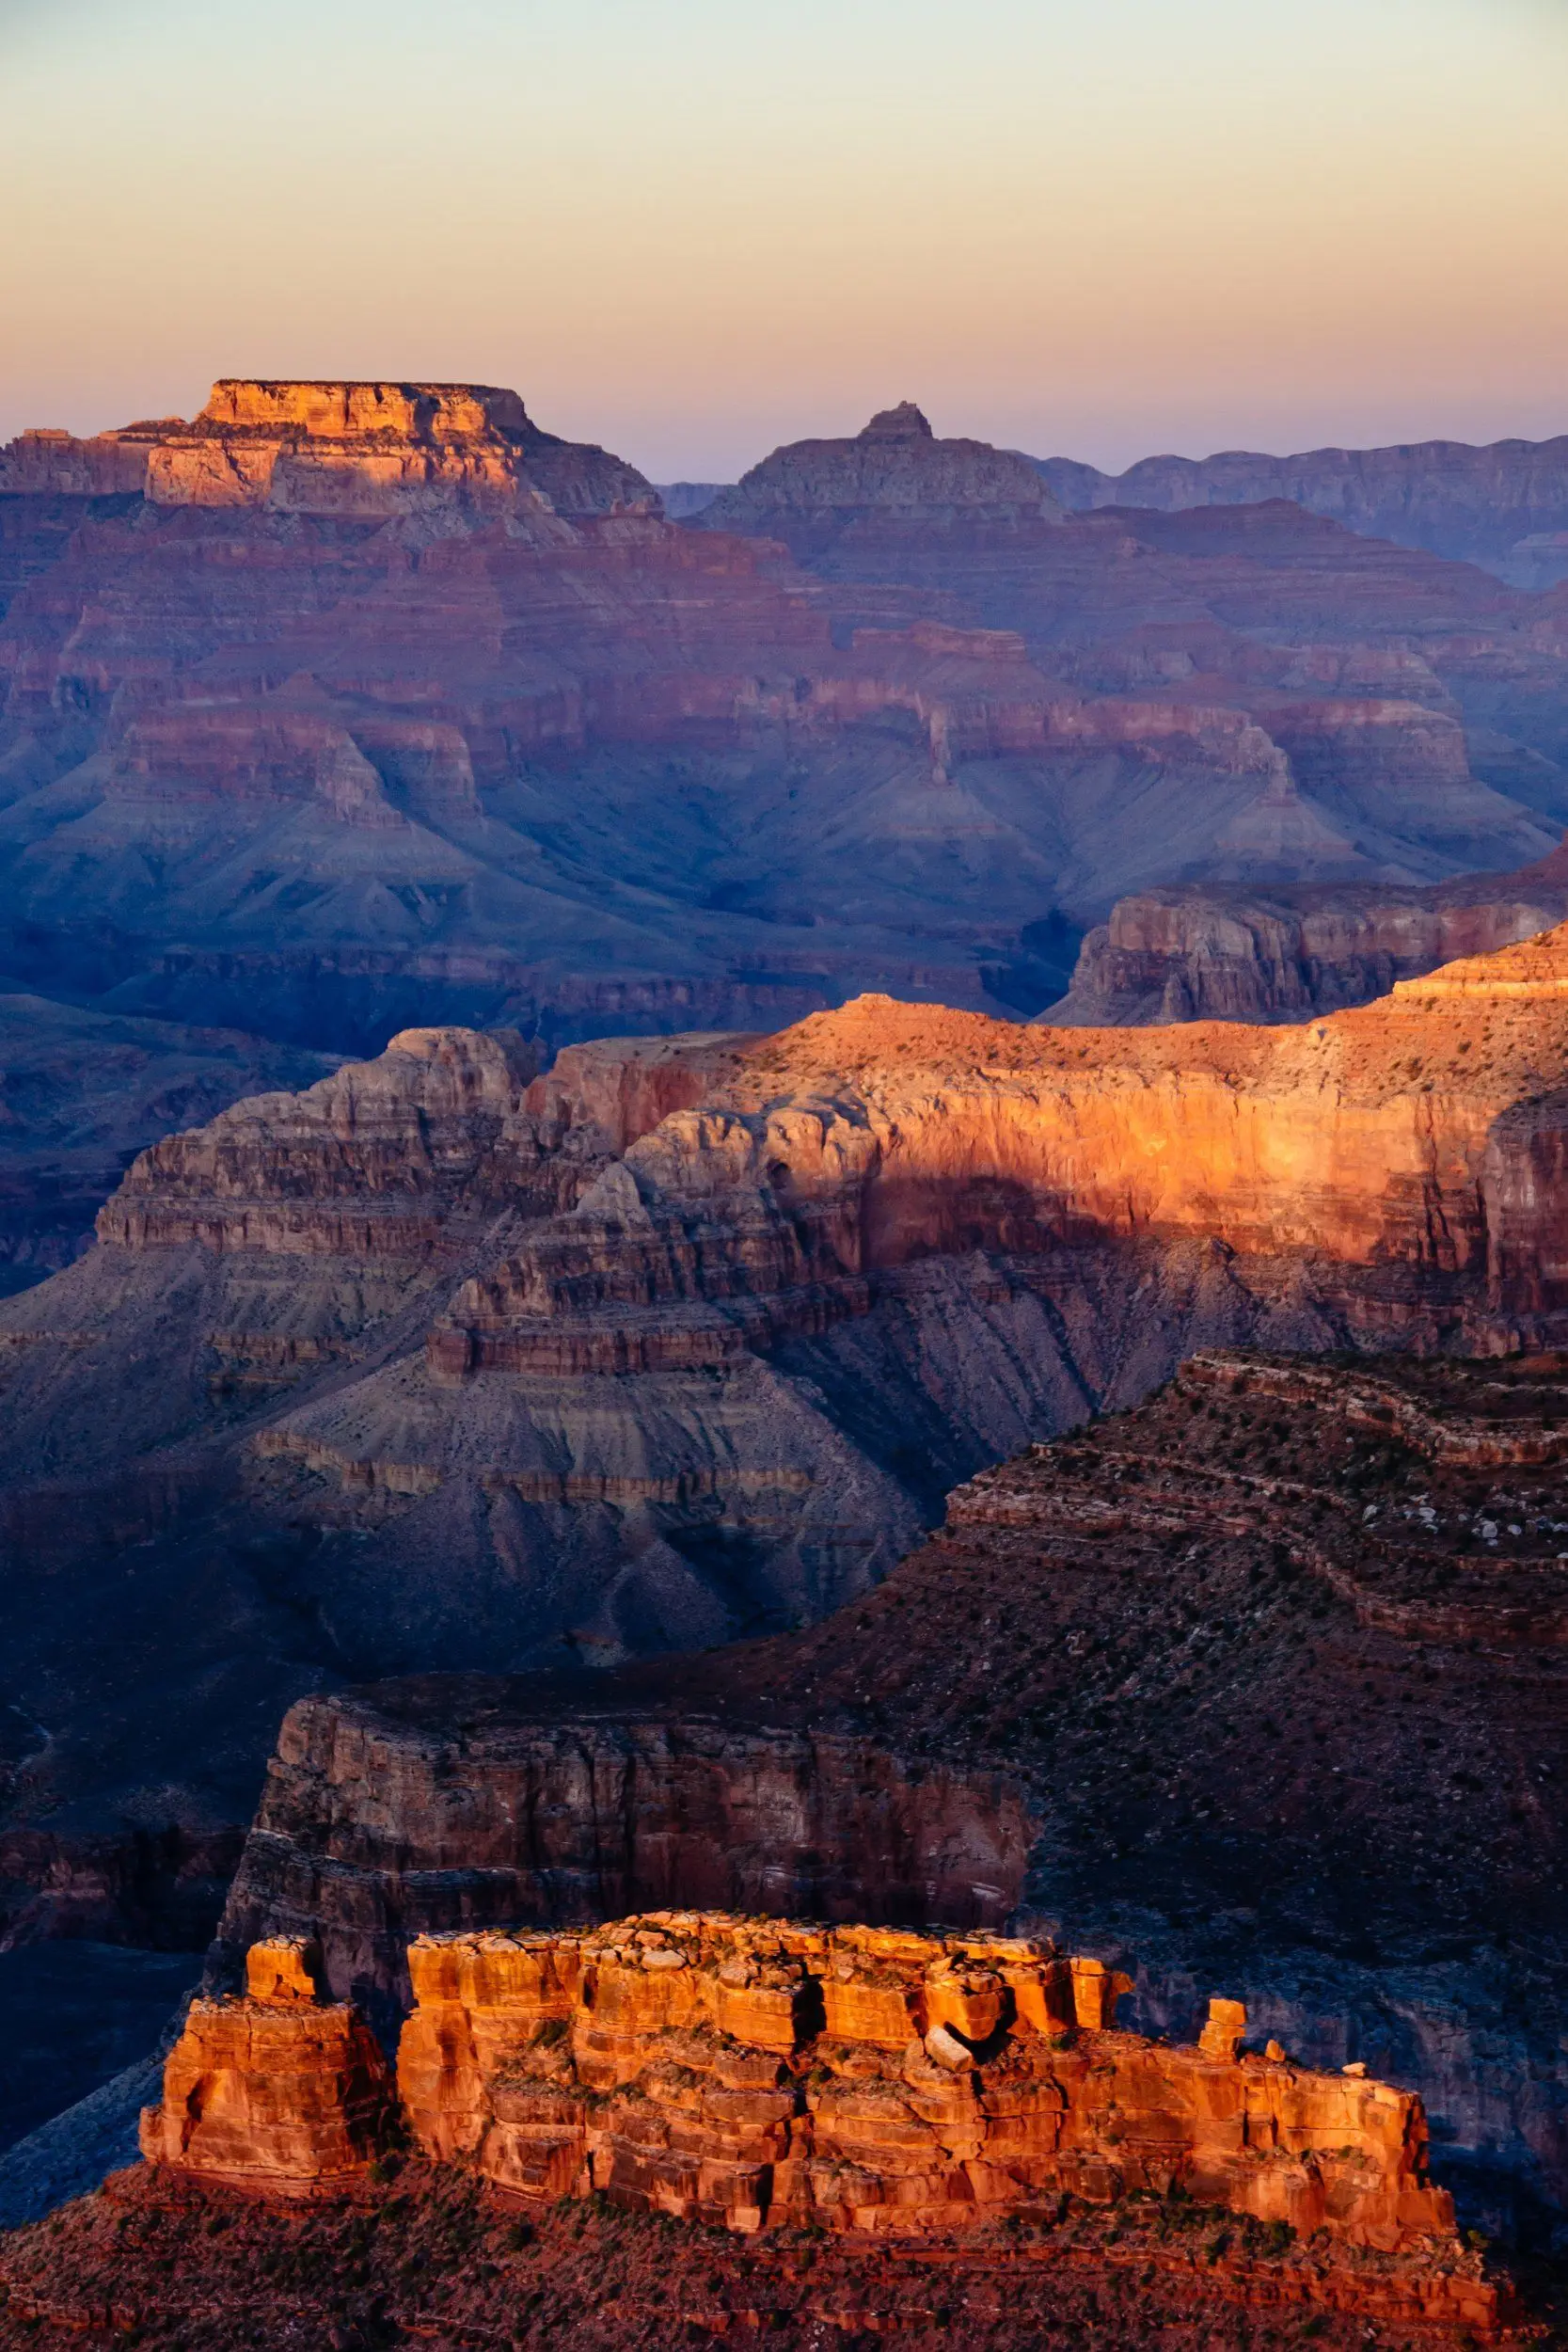 Rich gradients of warm to cool colors of the Grand Canyon seen from Hopi Point during sunset.